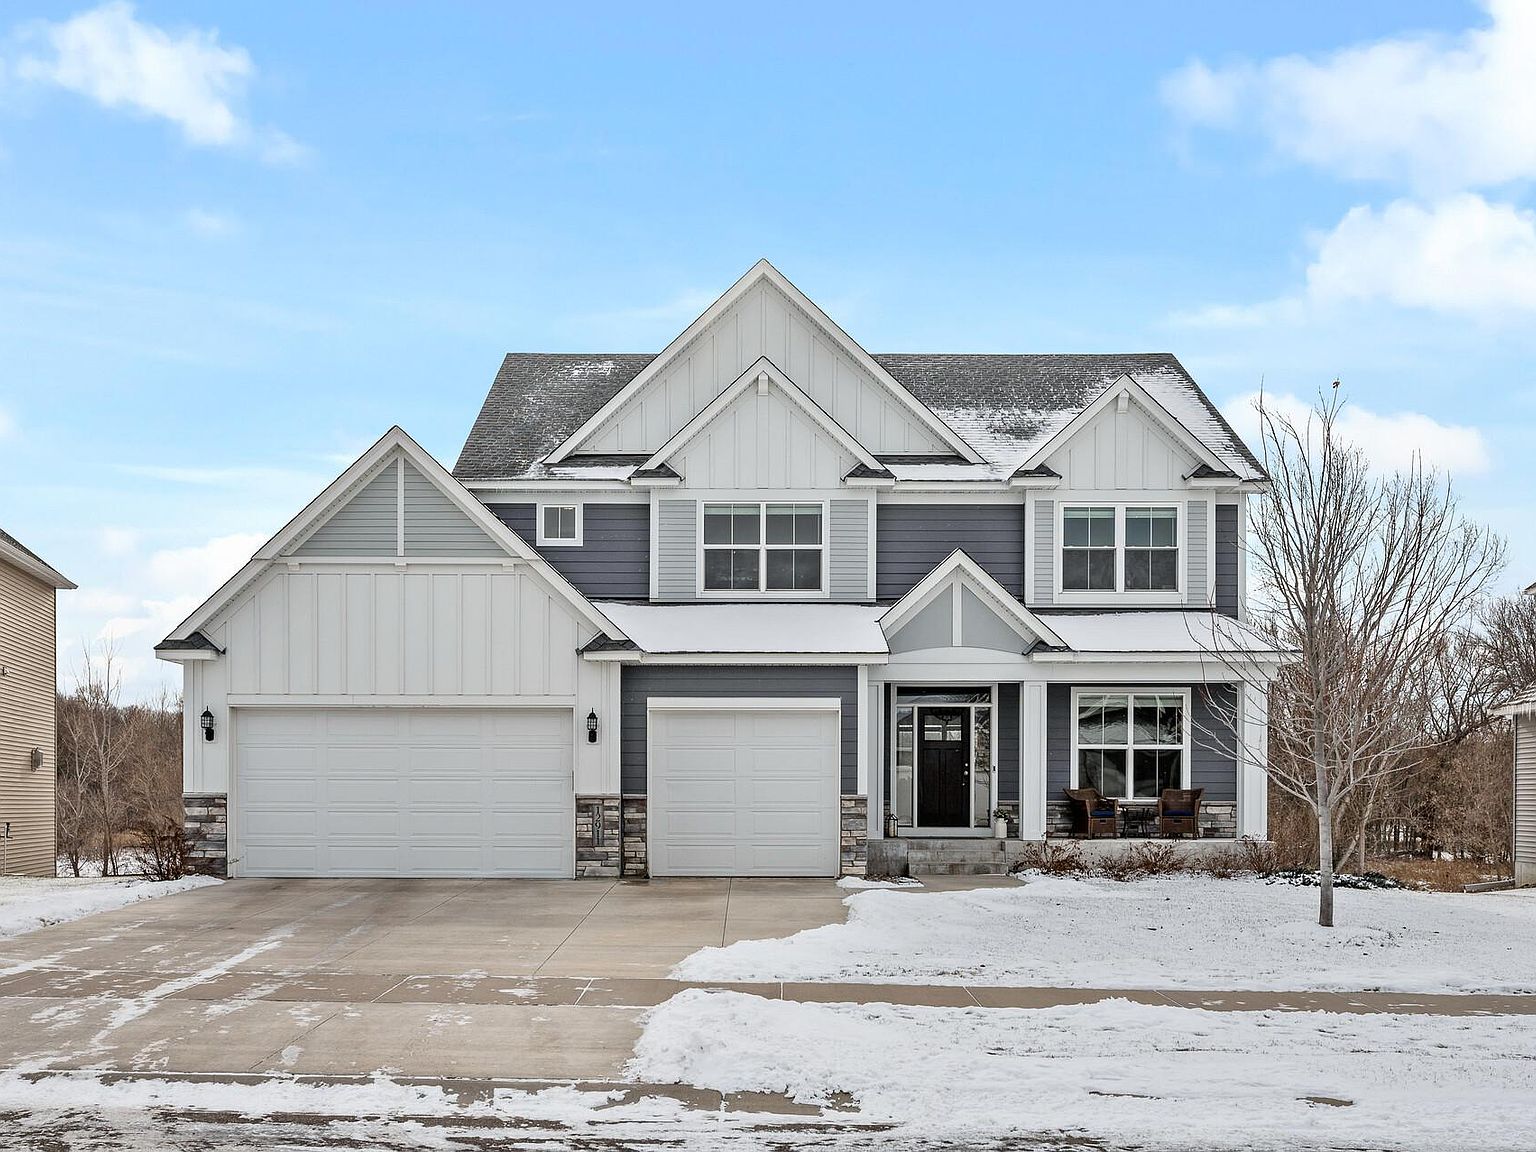 12911 137th Ave N, Dayton, MN 55327 | Zillow